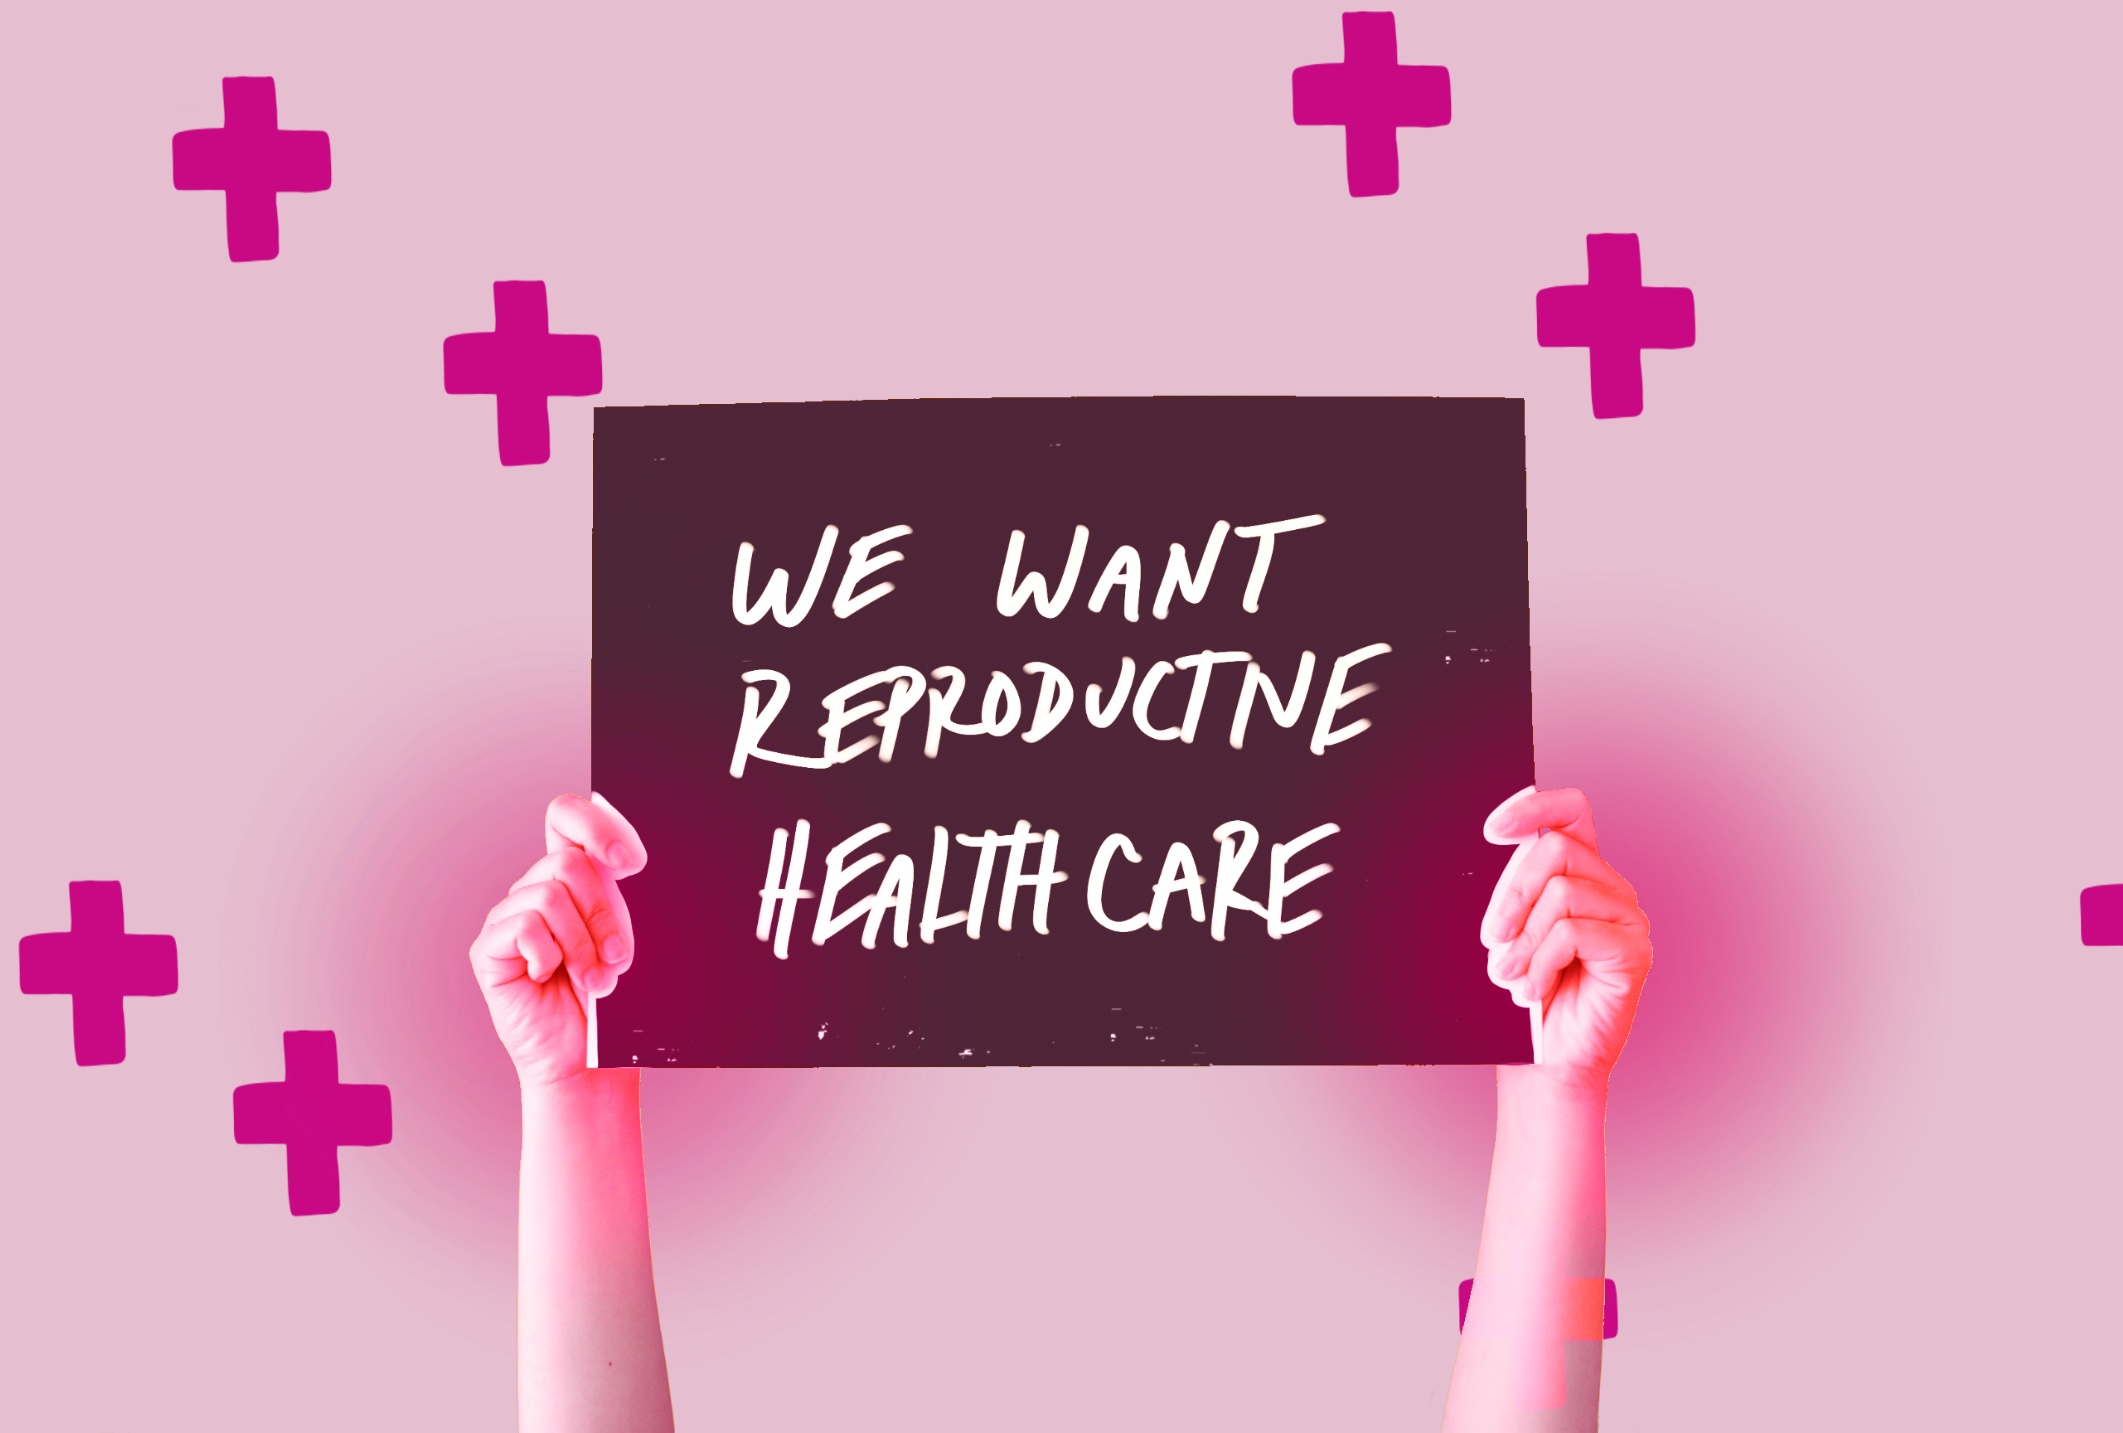 A sign is held up that says We Want Reproductive Healthcare with pink crosses around it.